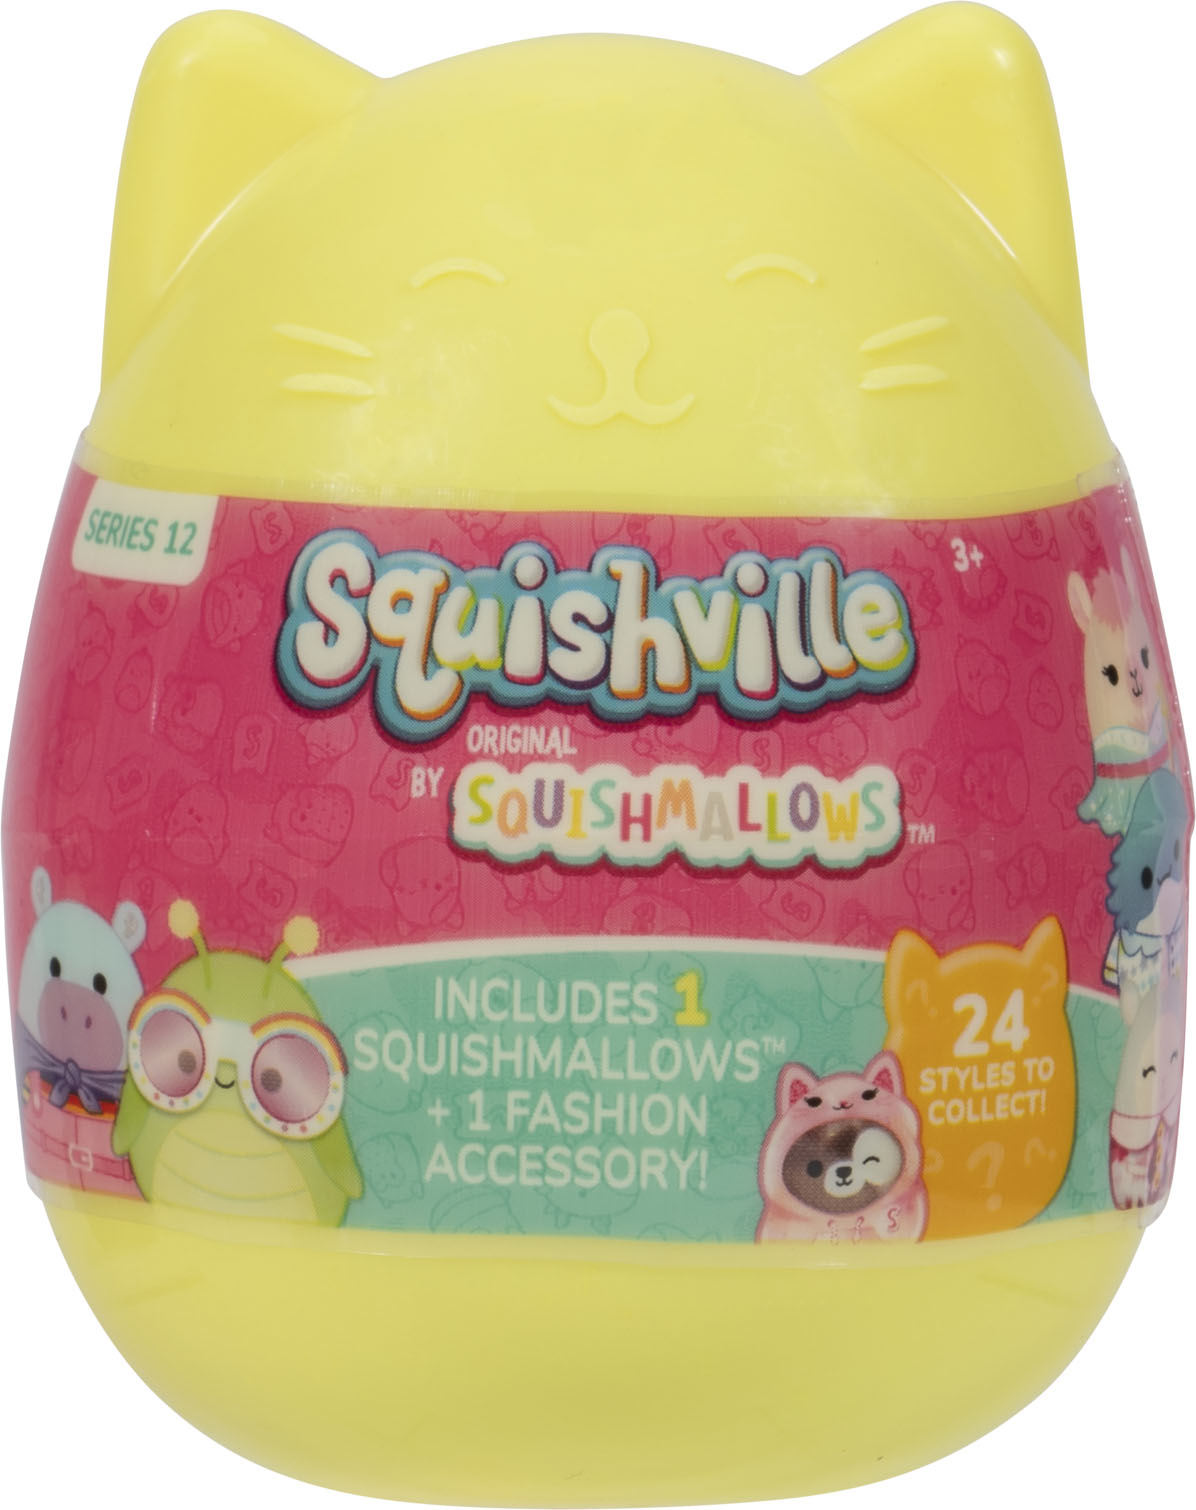 Squishville by Squishmallows Pink Play & Display